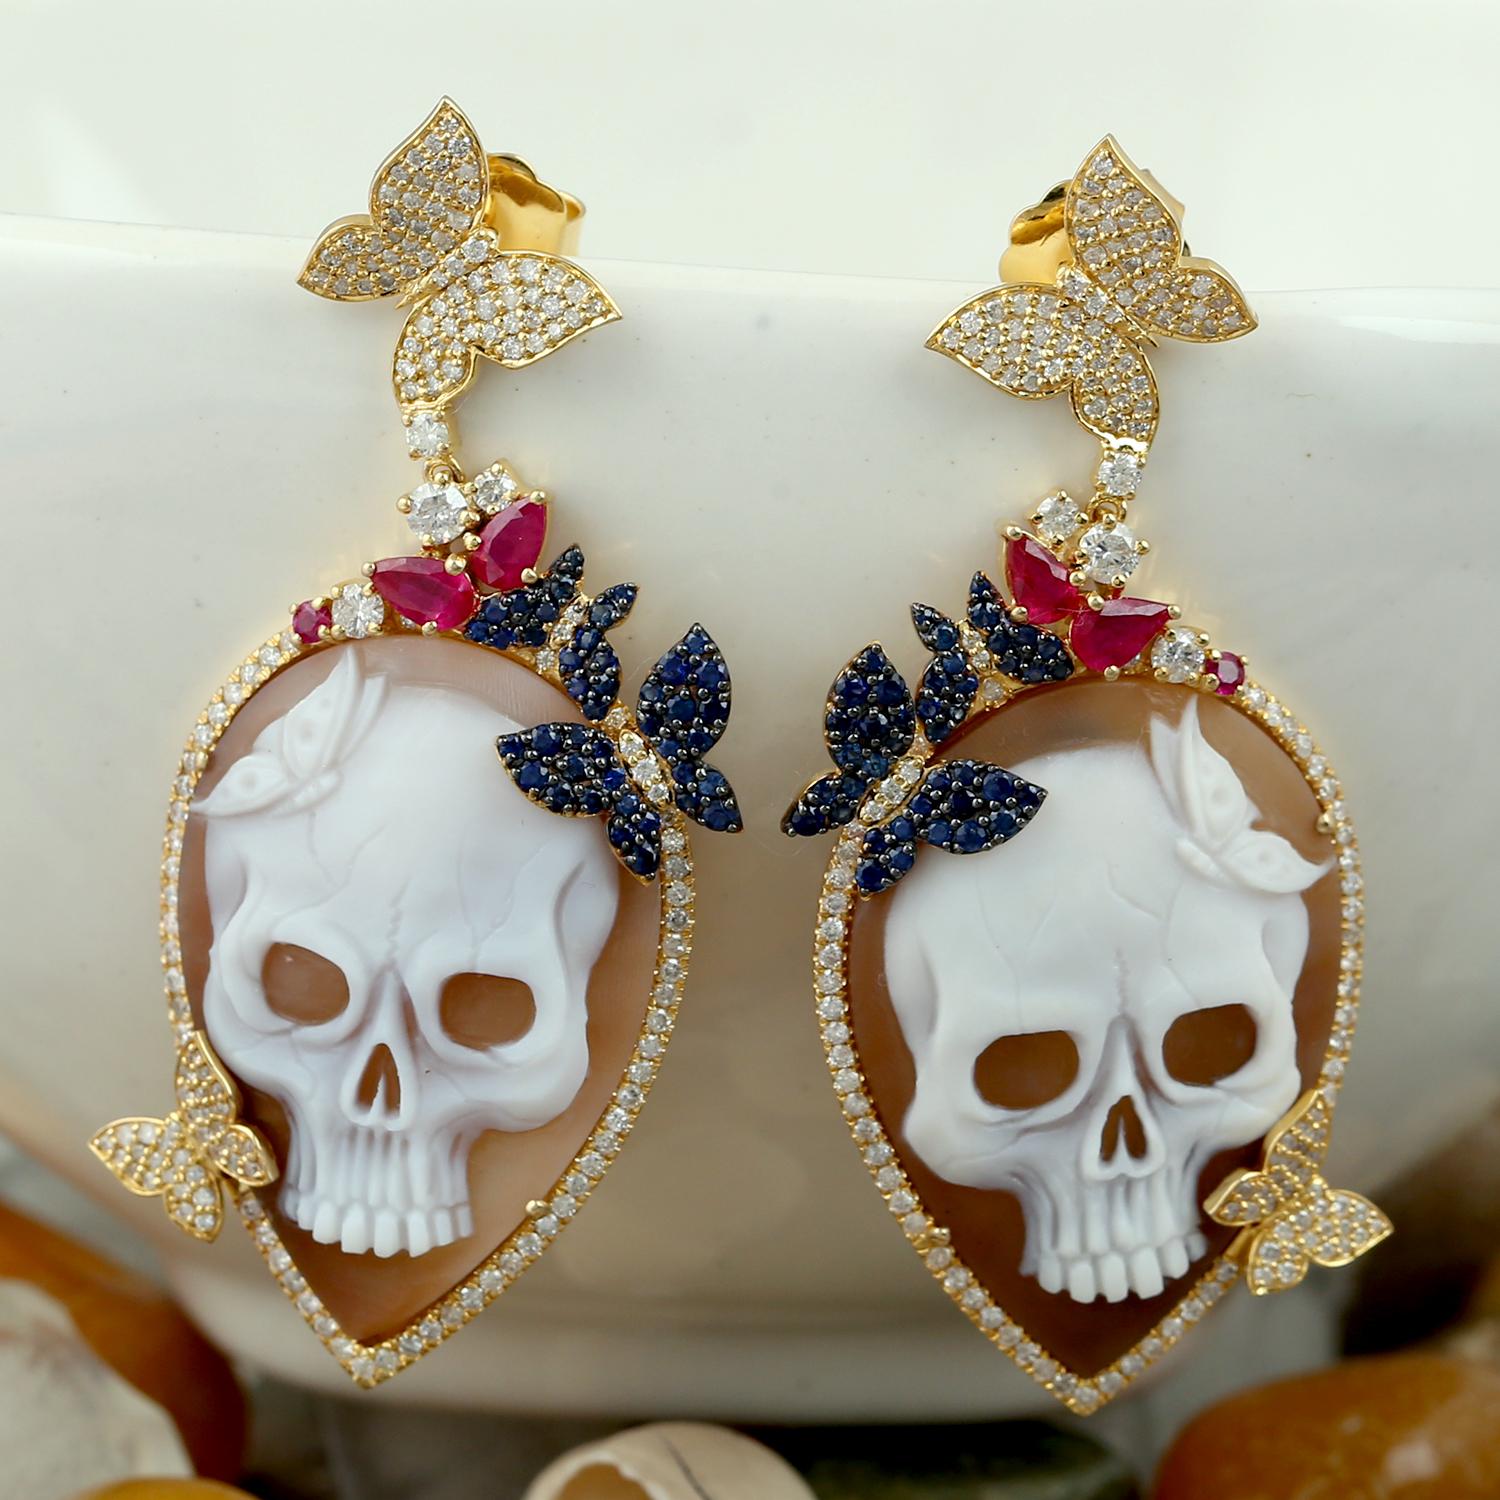 Artisan Shell Cameo Skull Carving & Butterfly Earrings With Sapphire, Diamonds & Ruby